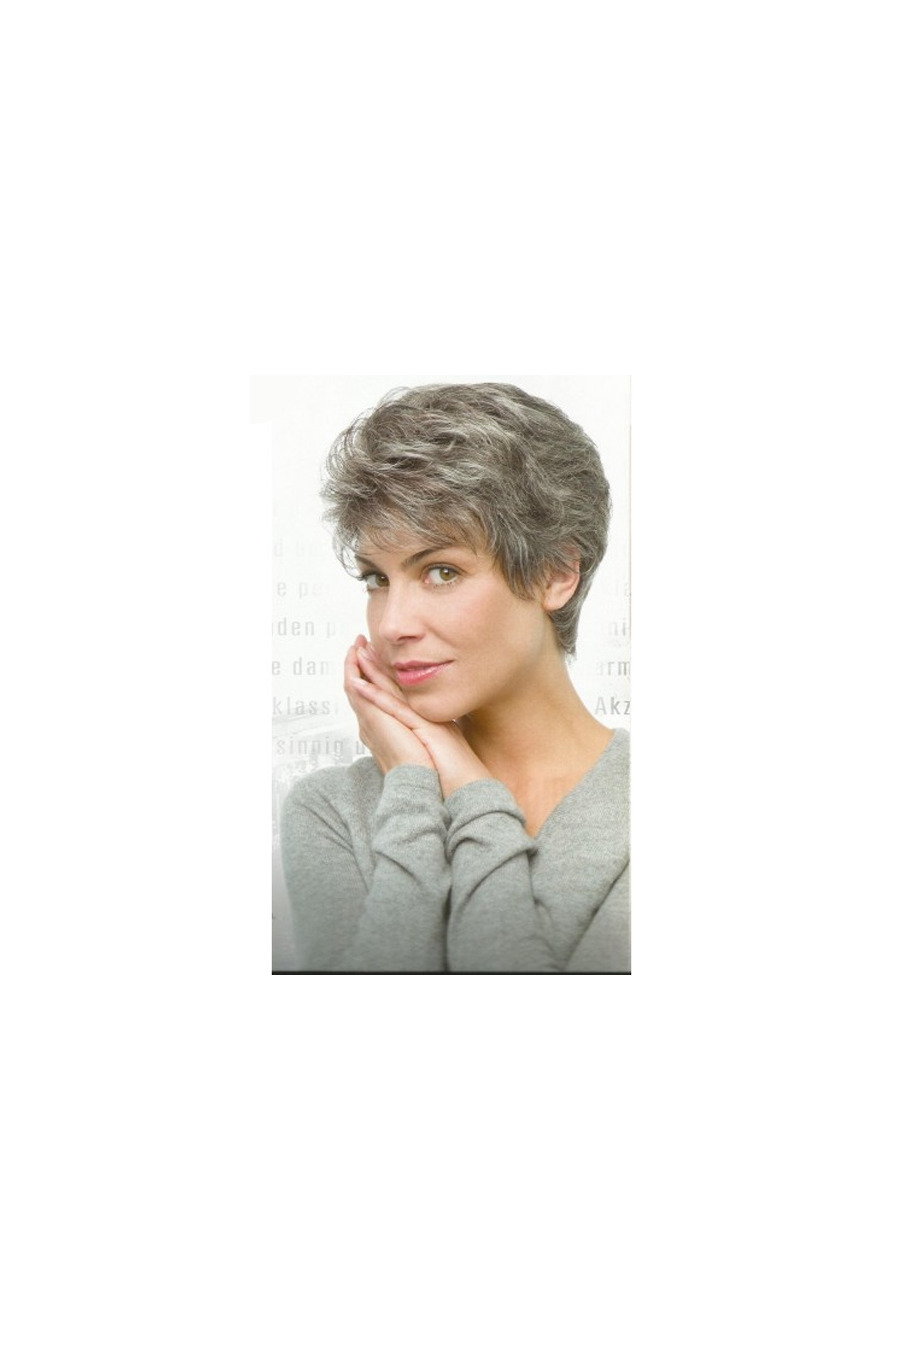 Short Length Synthetic Wig